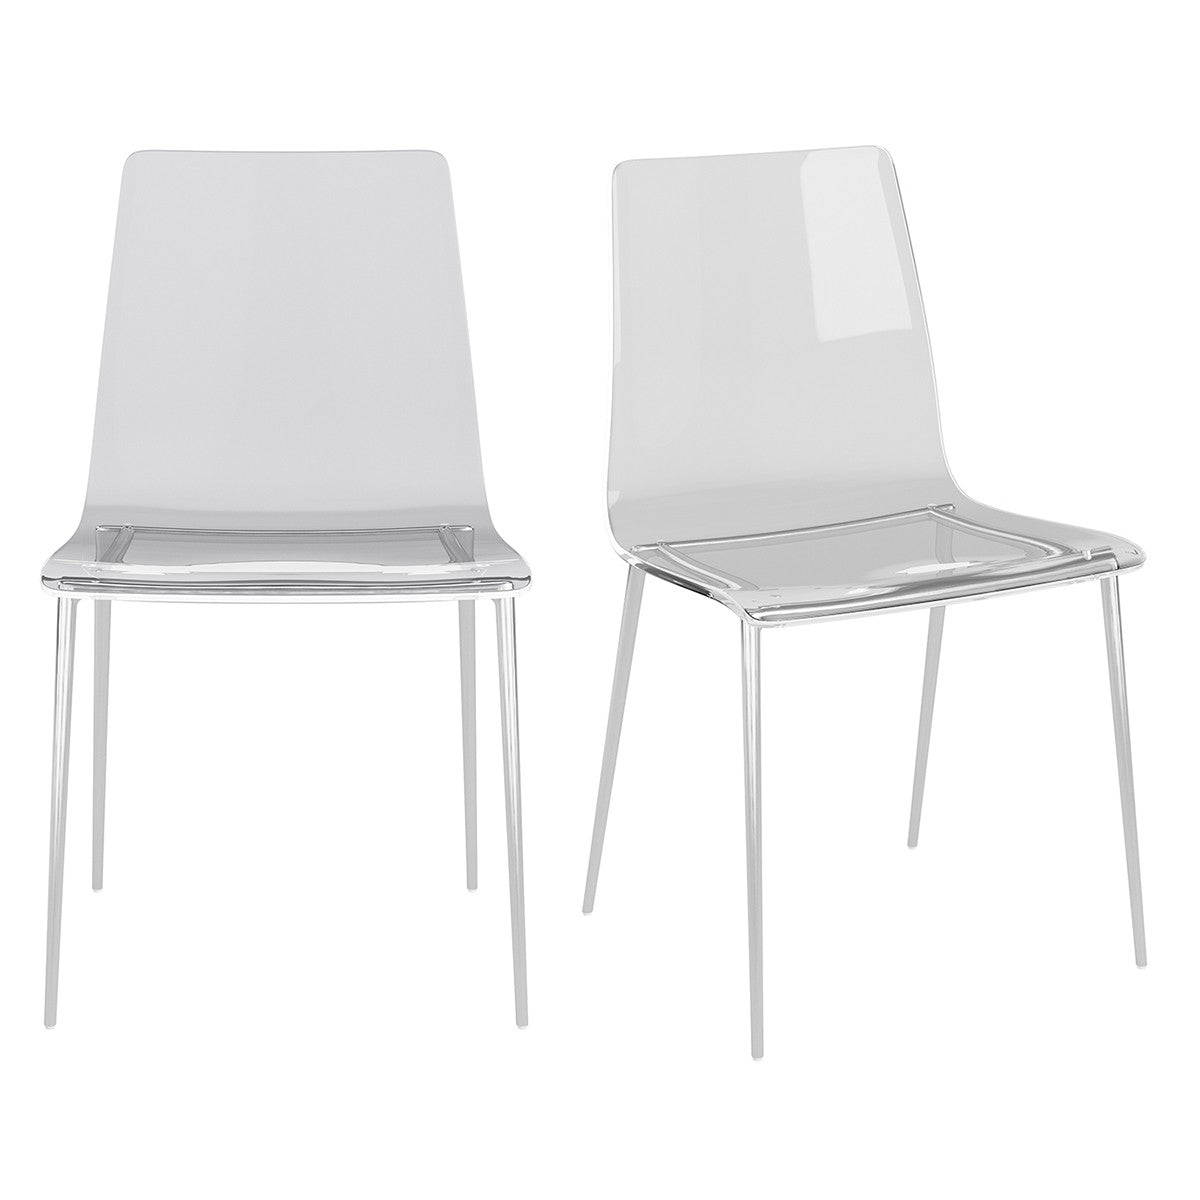 Set of Two Acrylic and Silver Steel Chairs